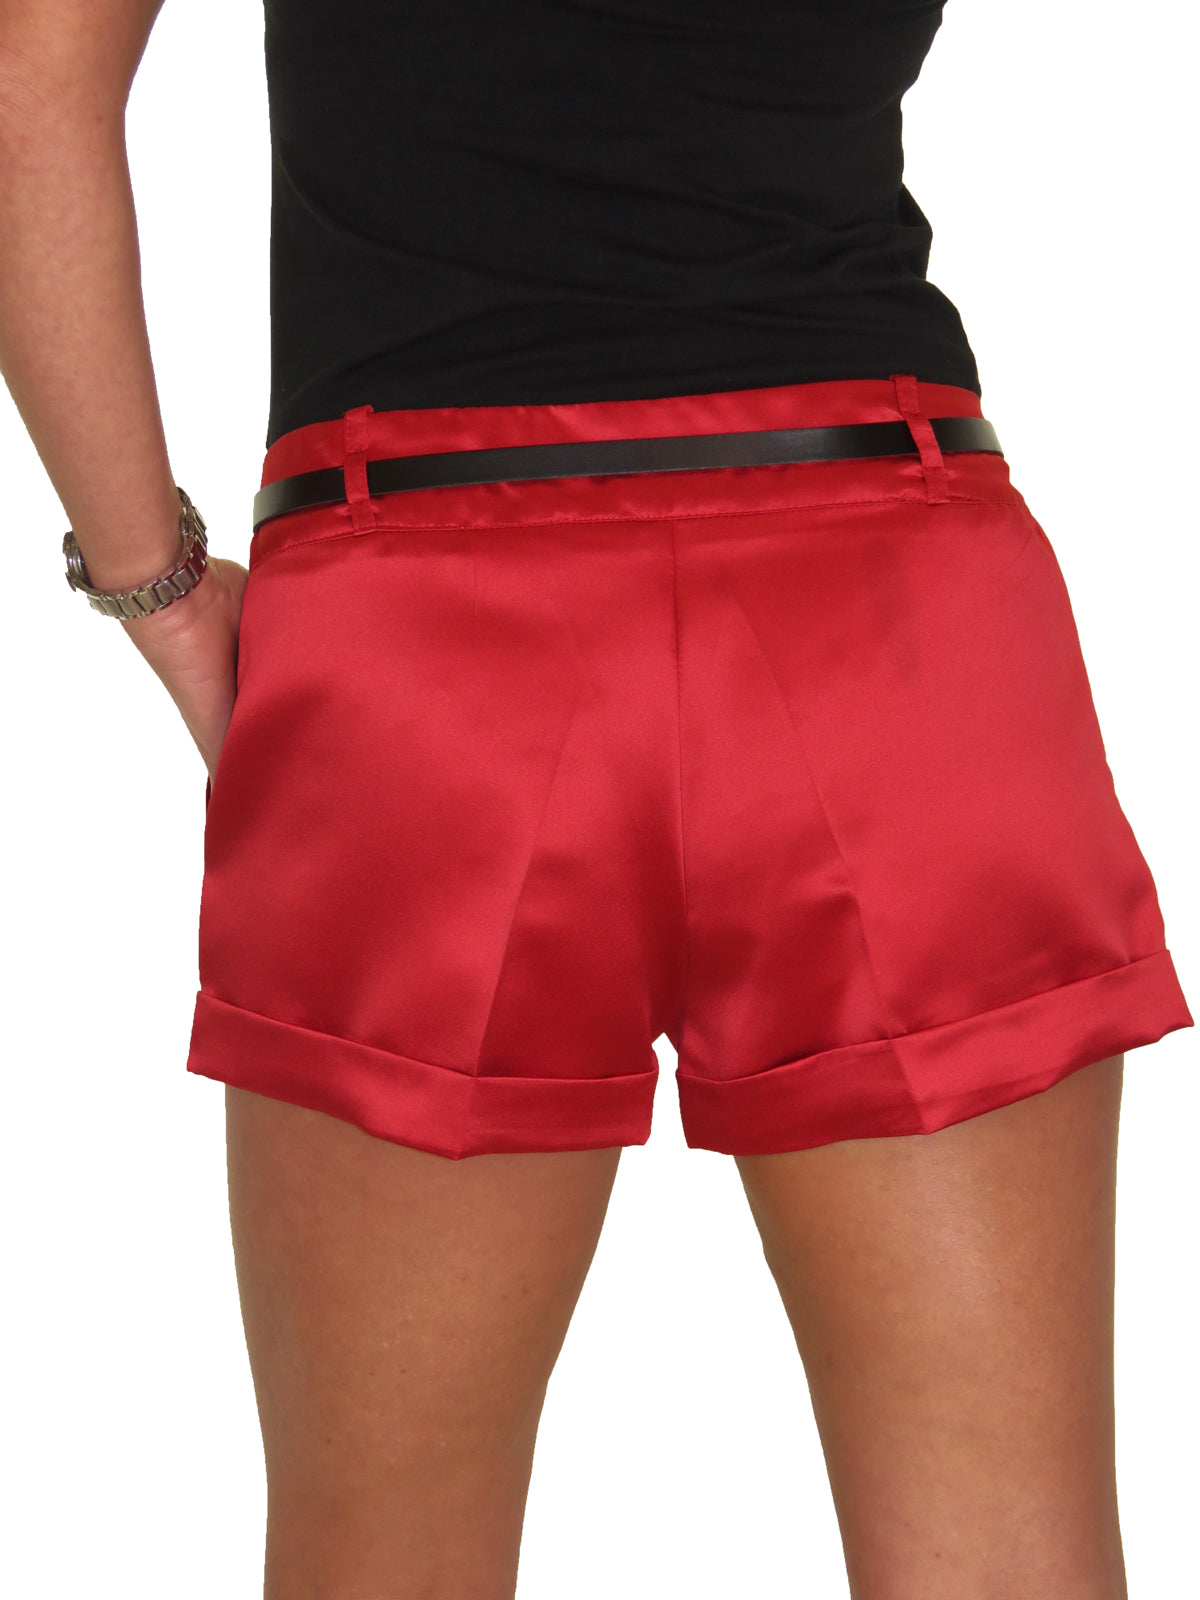 Ladies Red Shiny Satin Hotpant With Belt